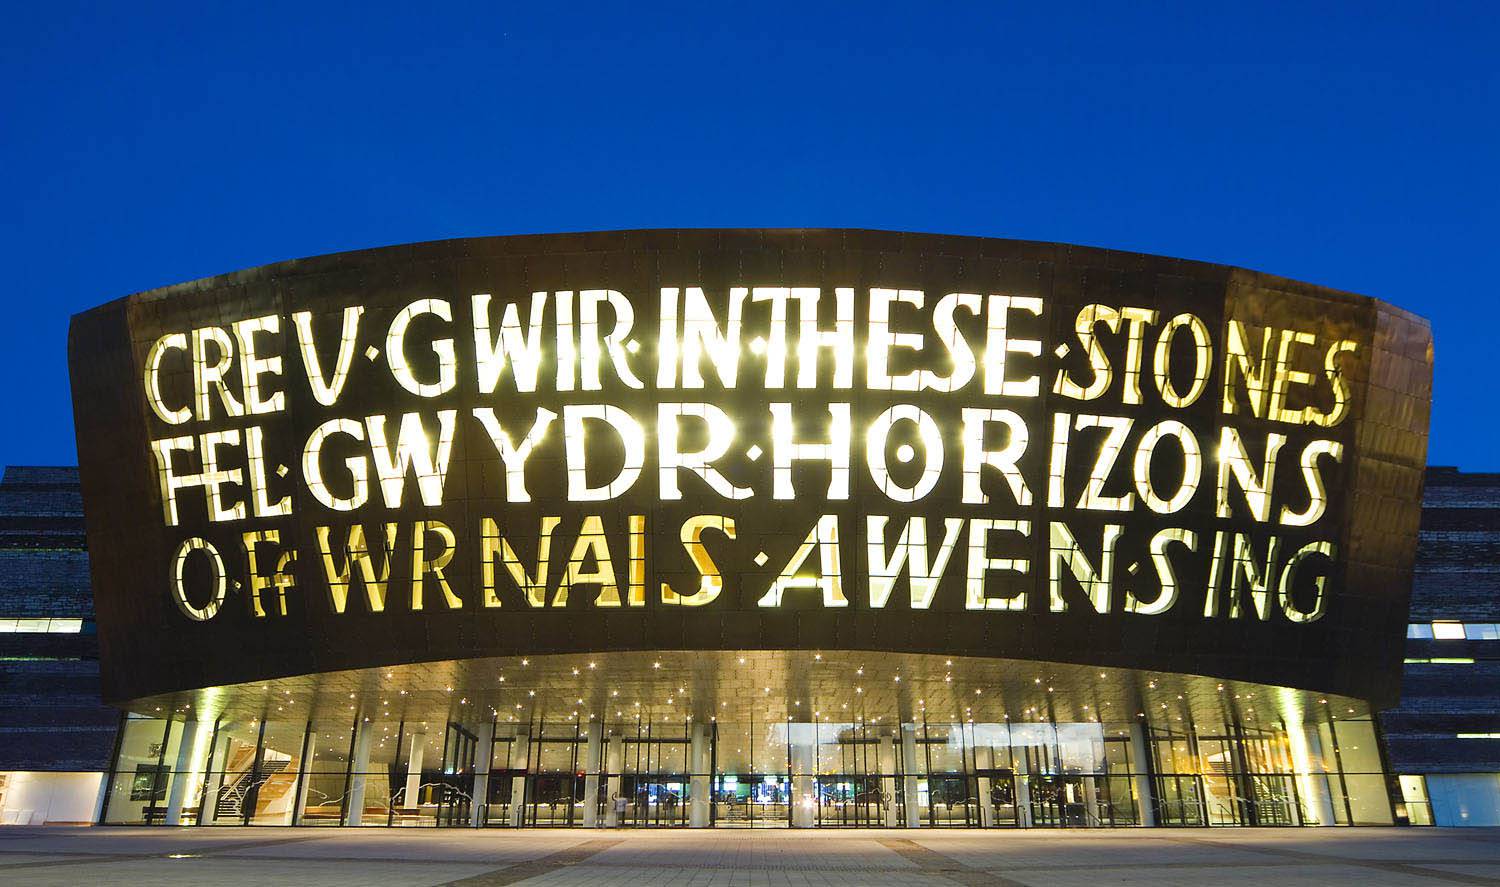 Wales Millennium Centre ,best places to visit in the UK